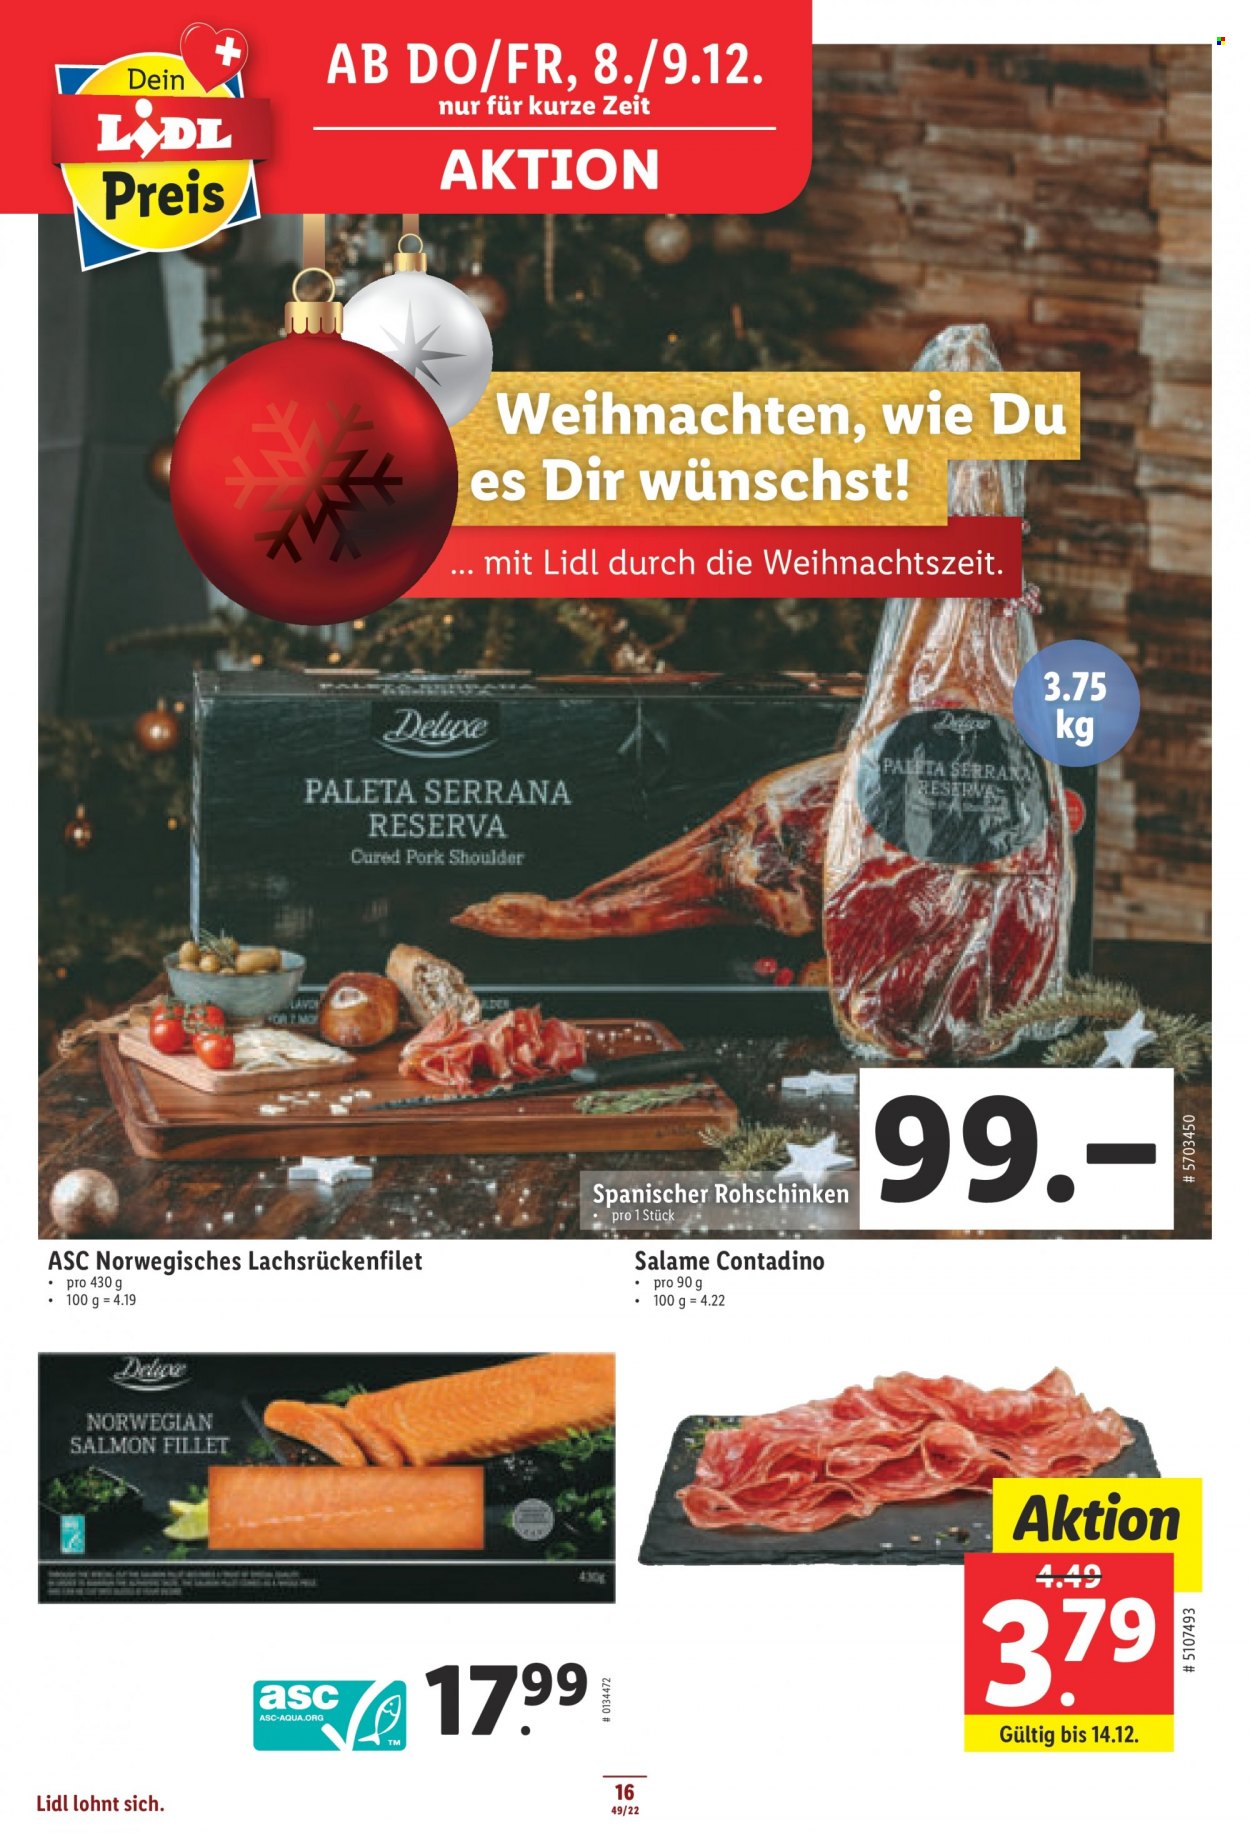 Catalogue Lidl - 8.12.2022 - 14.12.2022. Page 16.